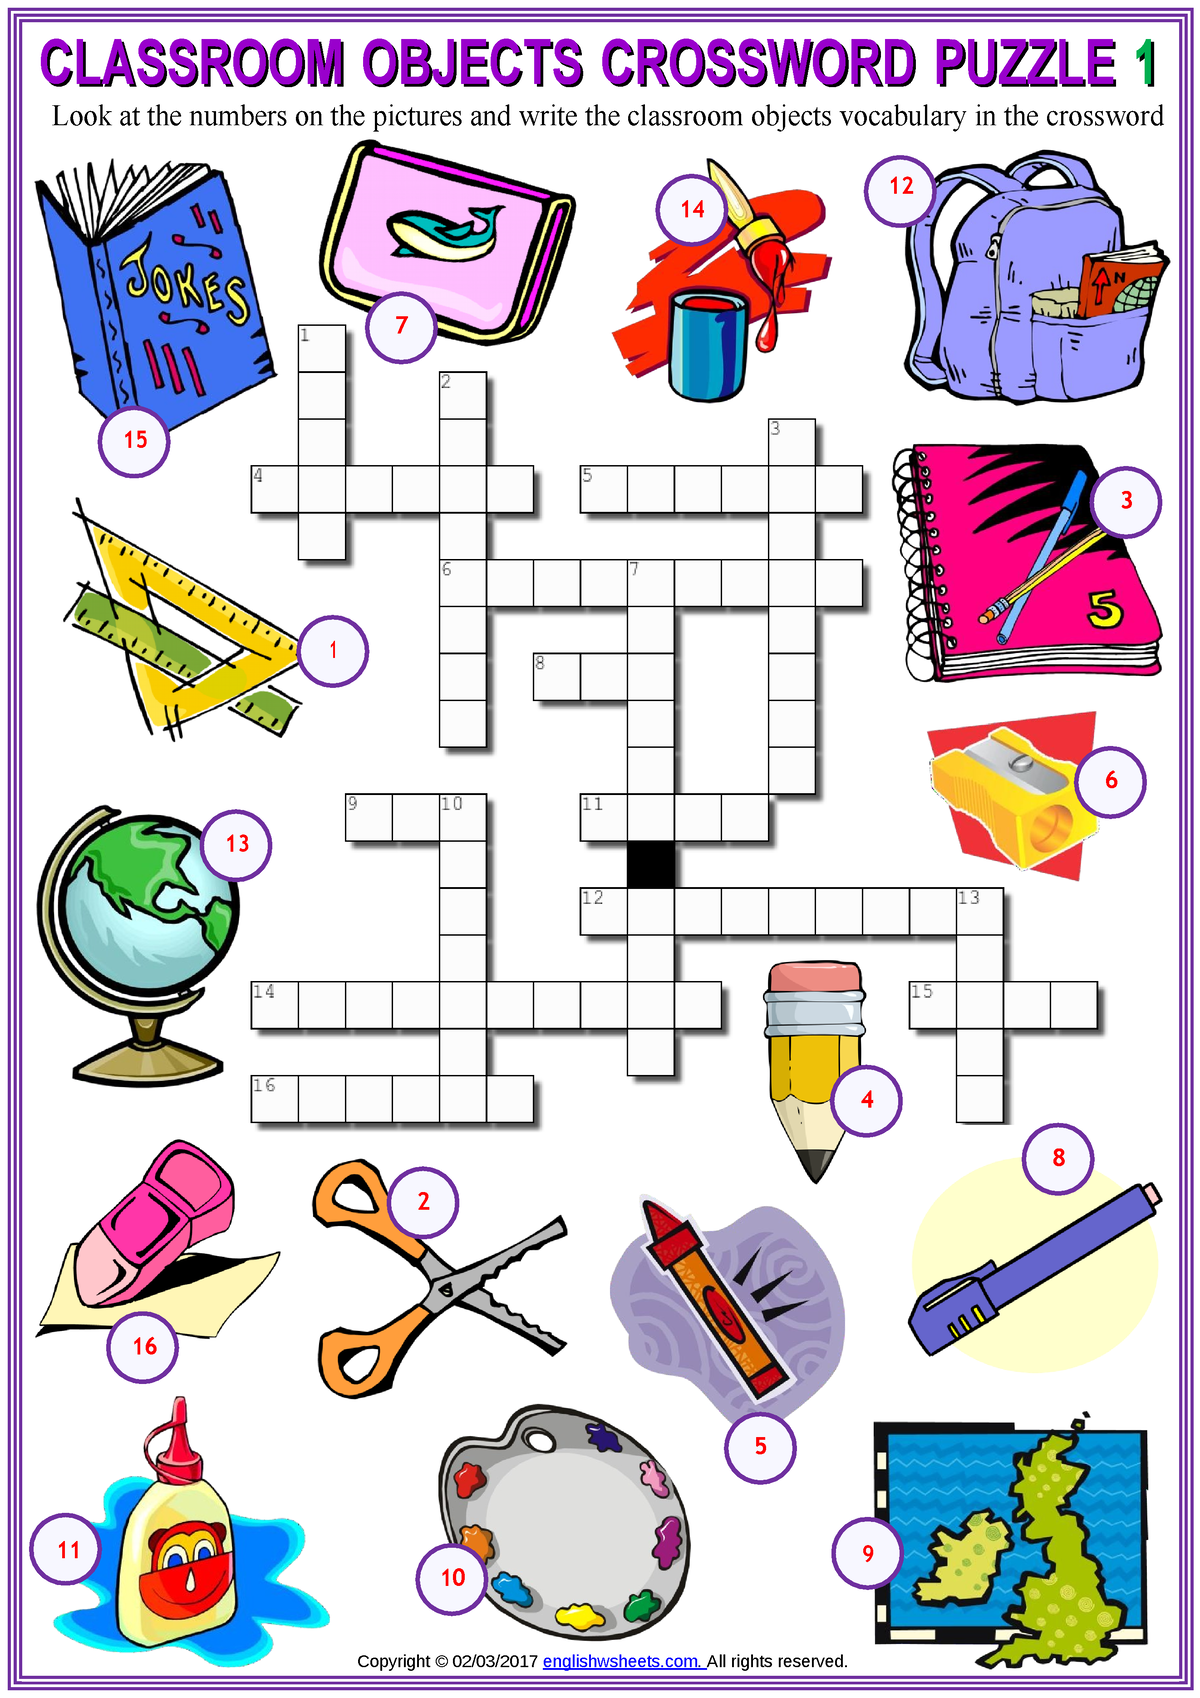 Classroom objects crossword puzzle Copyright © 02/03/2017